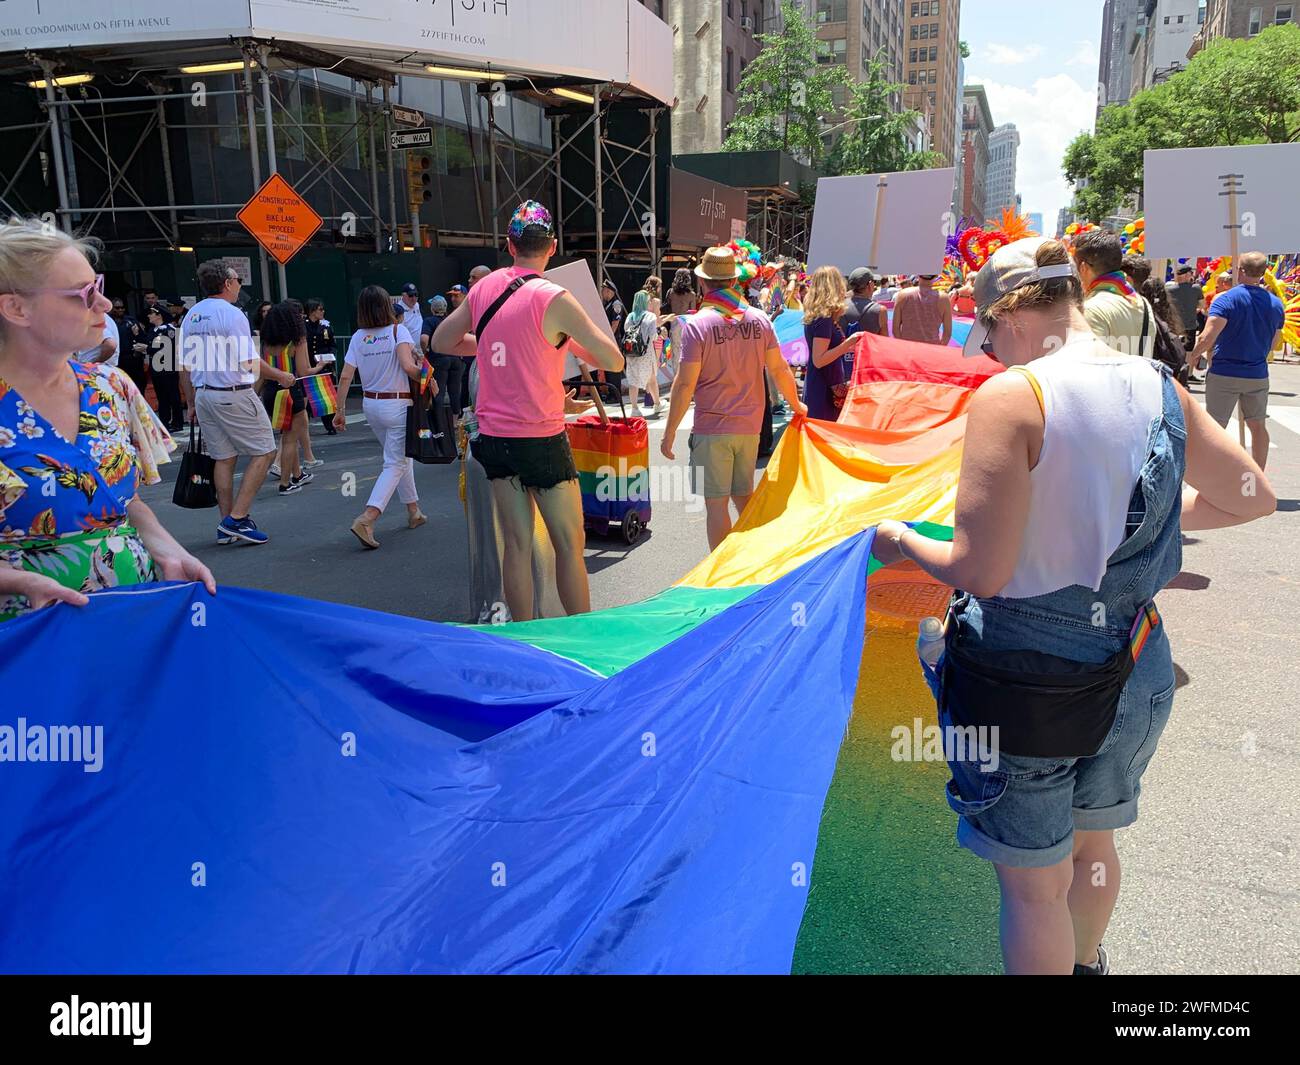 At the New York Gay Pride parade, participants unfurl the rainbow flag, showing their support for the LBGT community Stock Photo